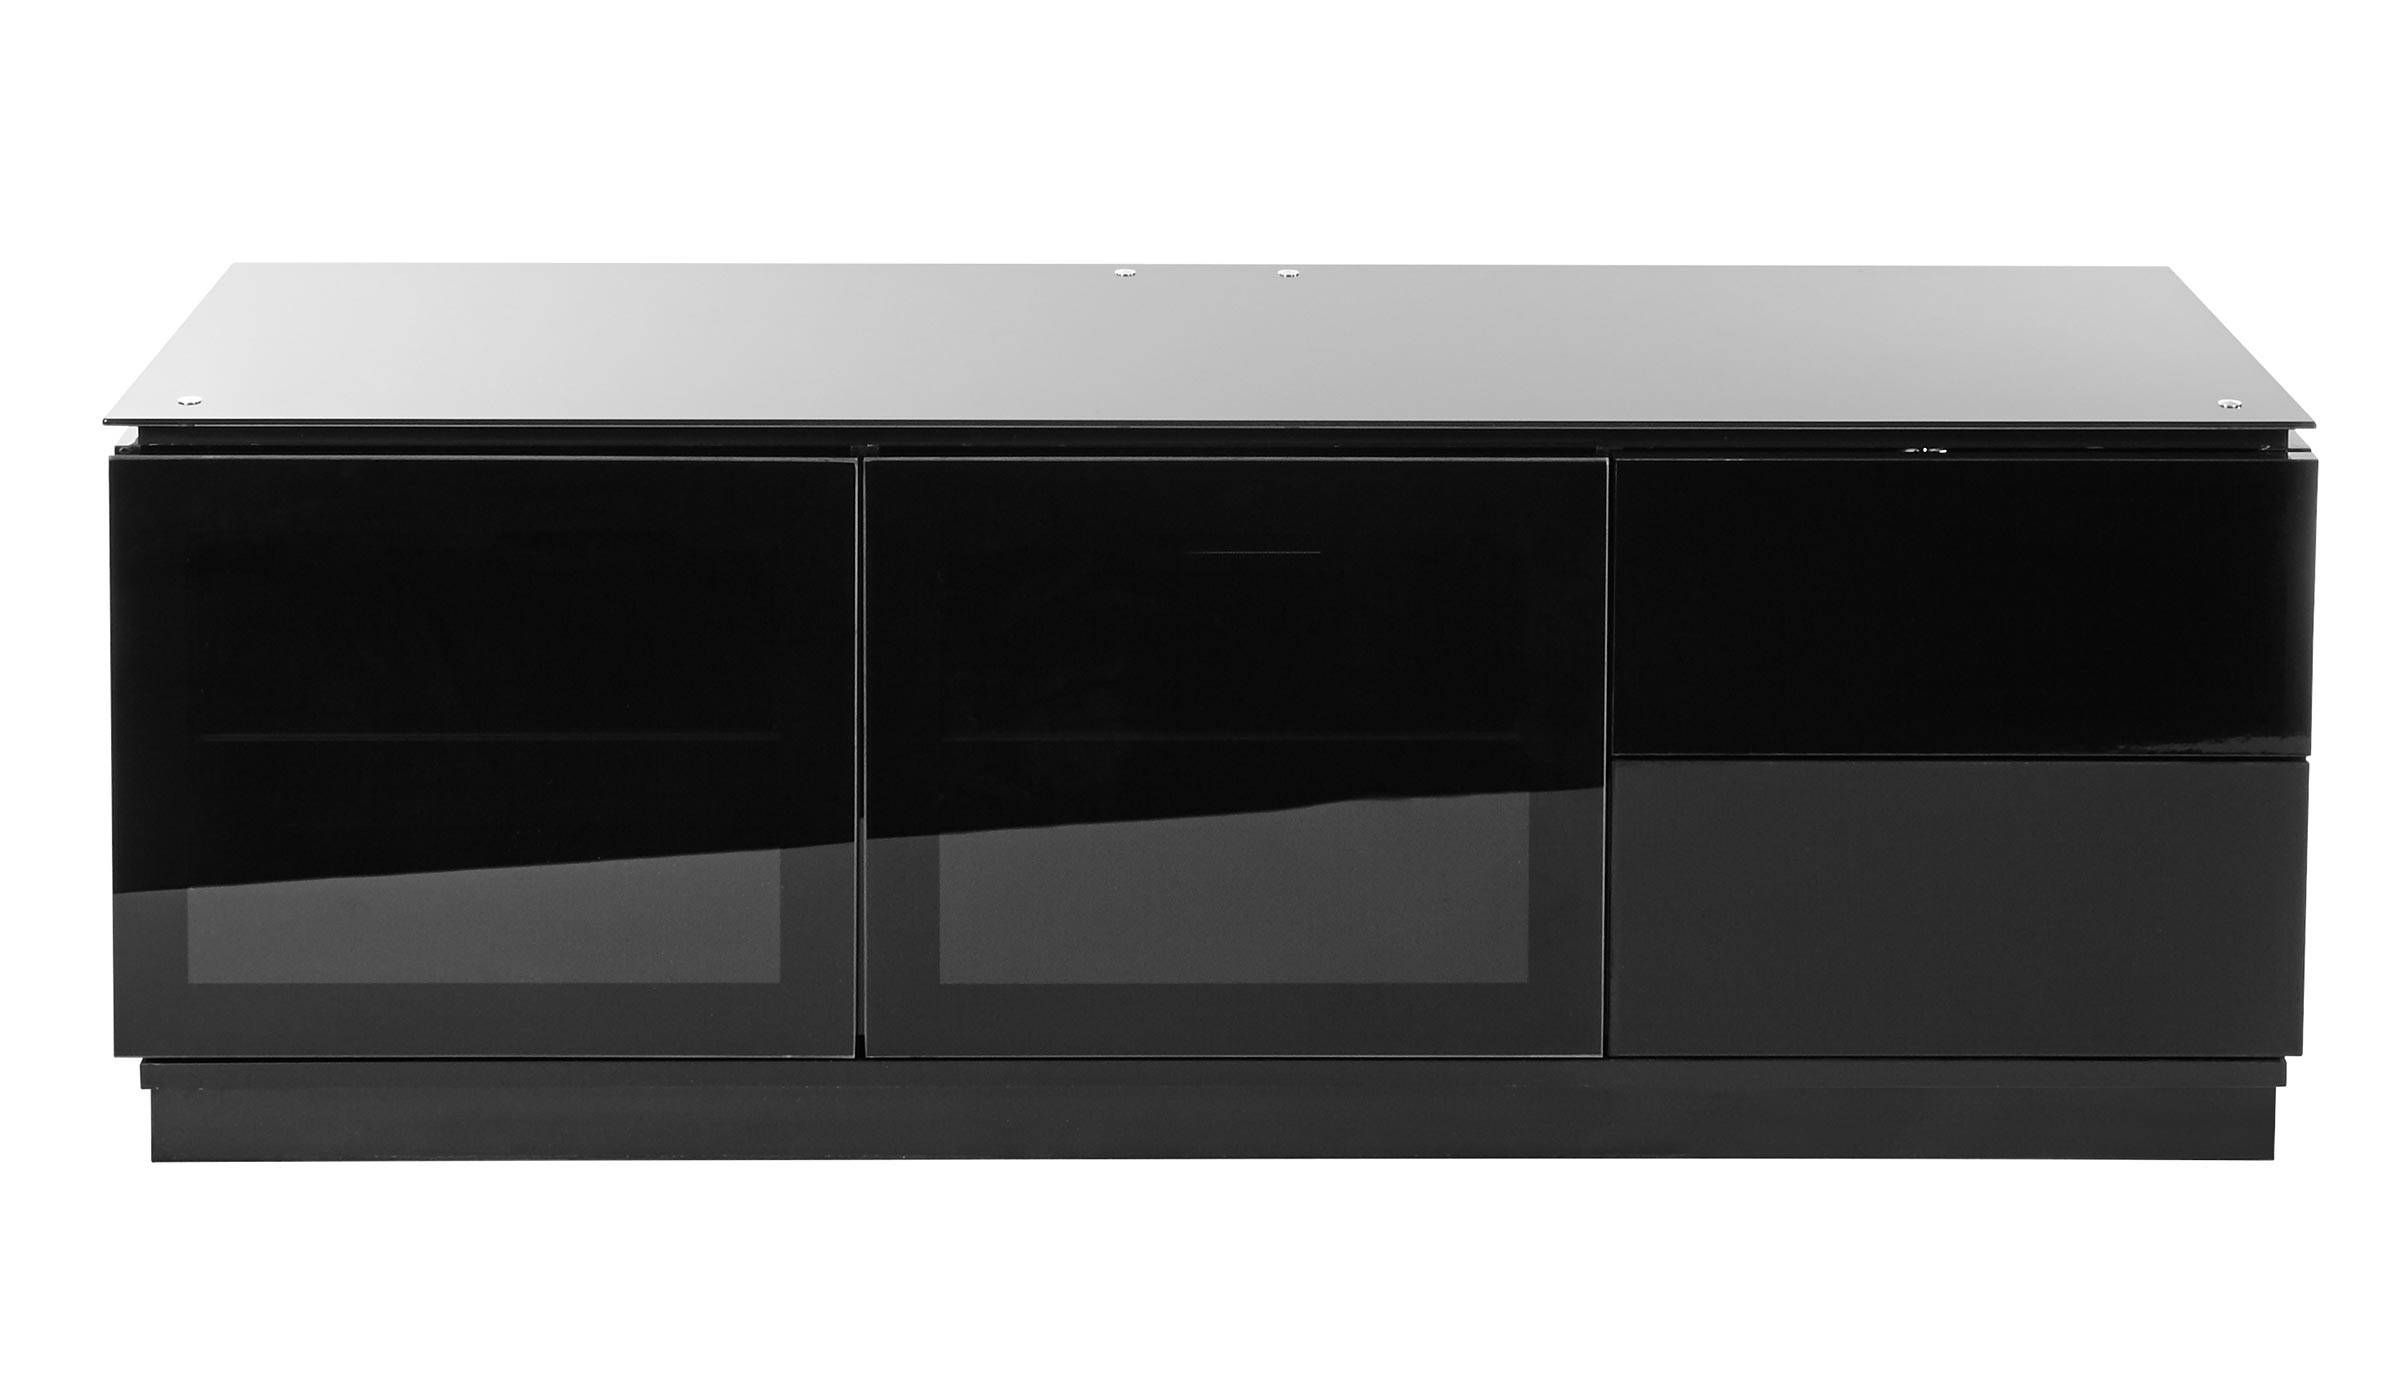 Black Gloss Tv Cabinet Up To 65" Tv | Casino Mmt C1500b In Black Tv Cabinets With Drawers (View 15 of 15)